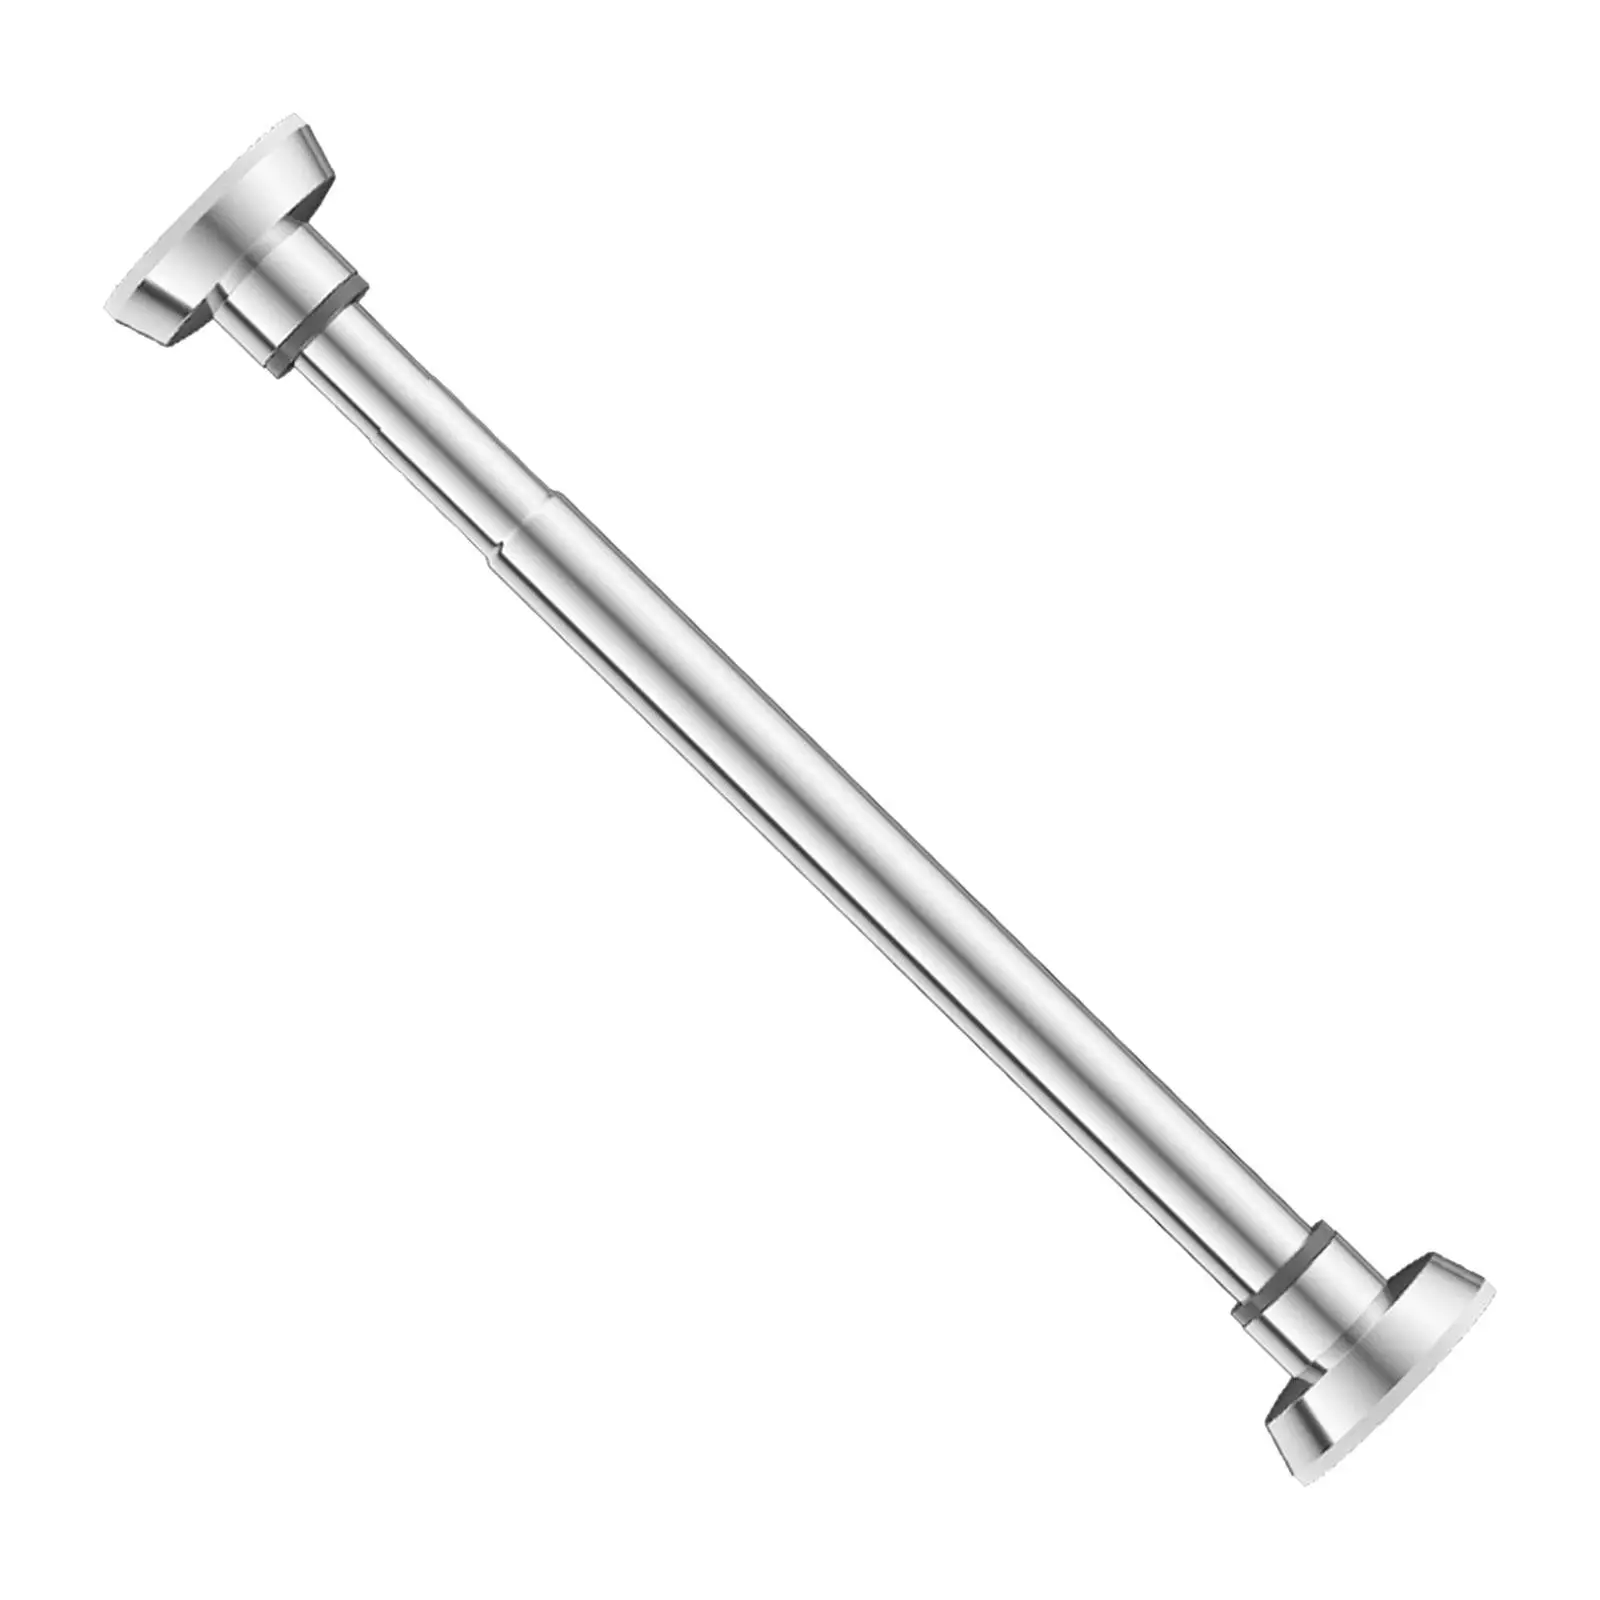 Clothes Rod Adjustable Length Curtain Rod Wall Mounted Clothes Hanger for Bedroom Closet Laundry Room Bathroom Wardrobe